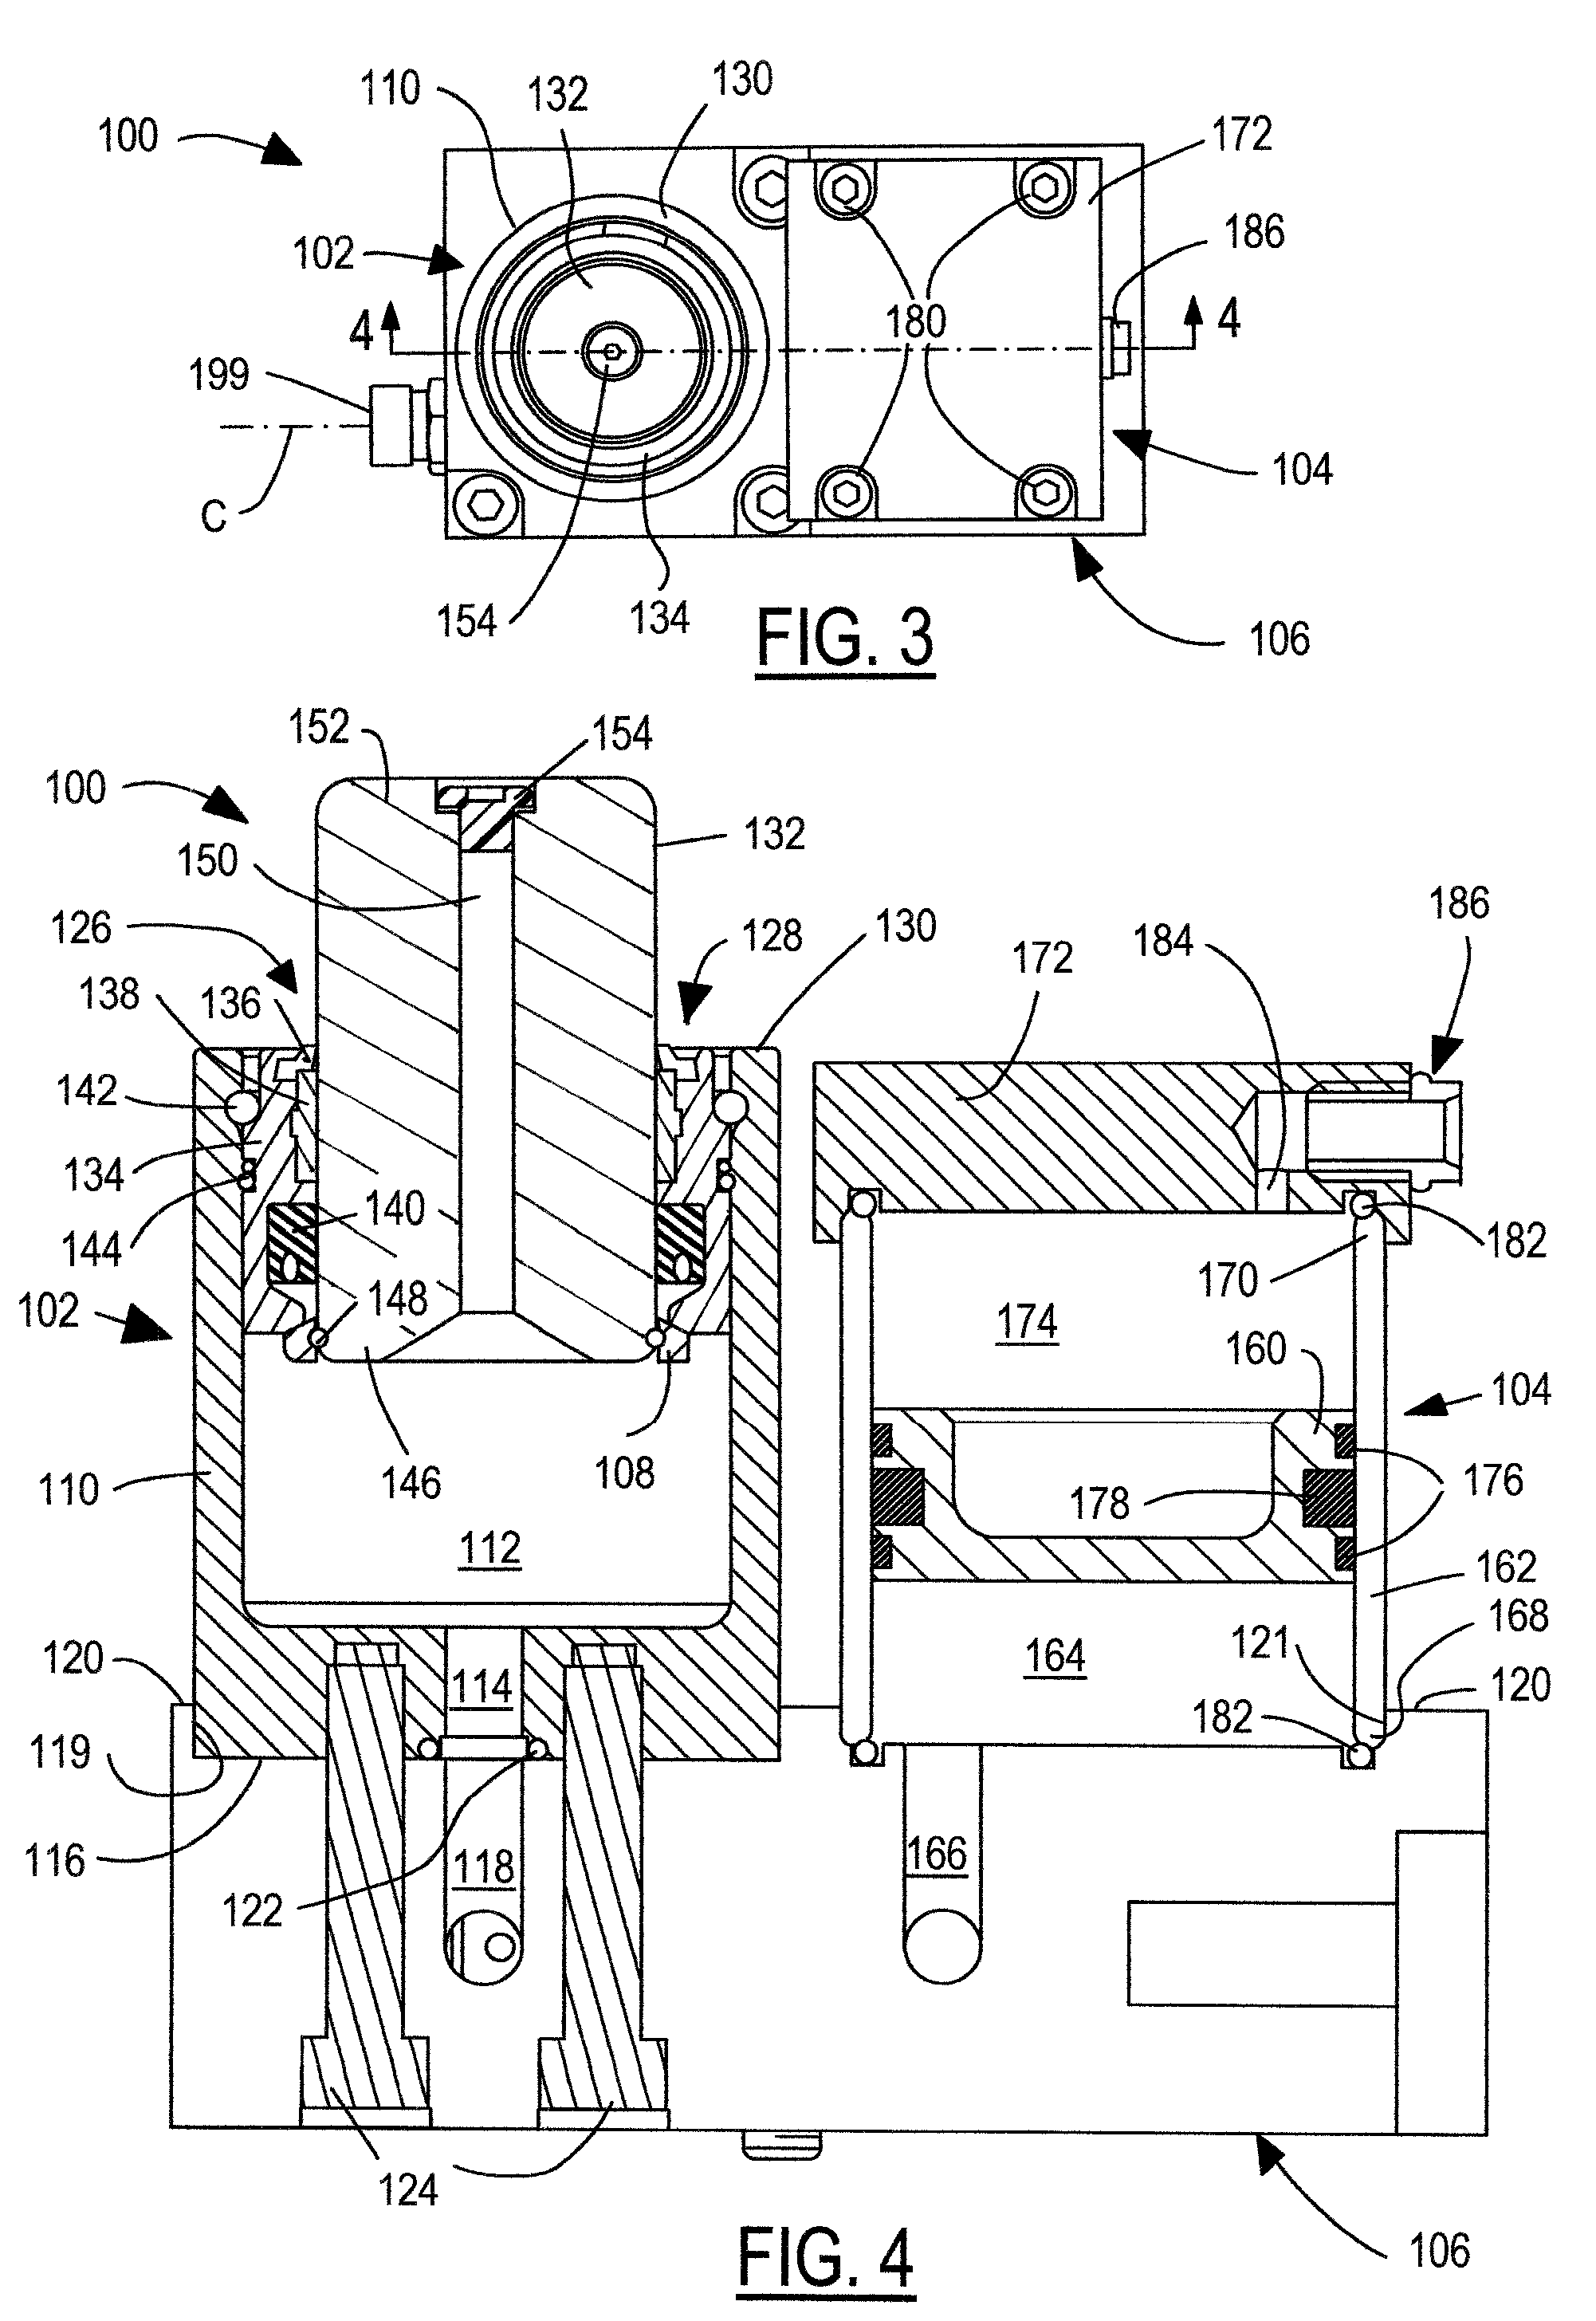 Press-driven tool actuation system